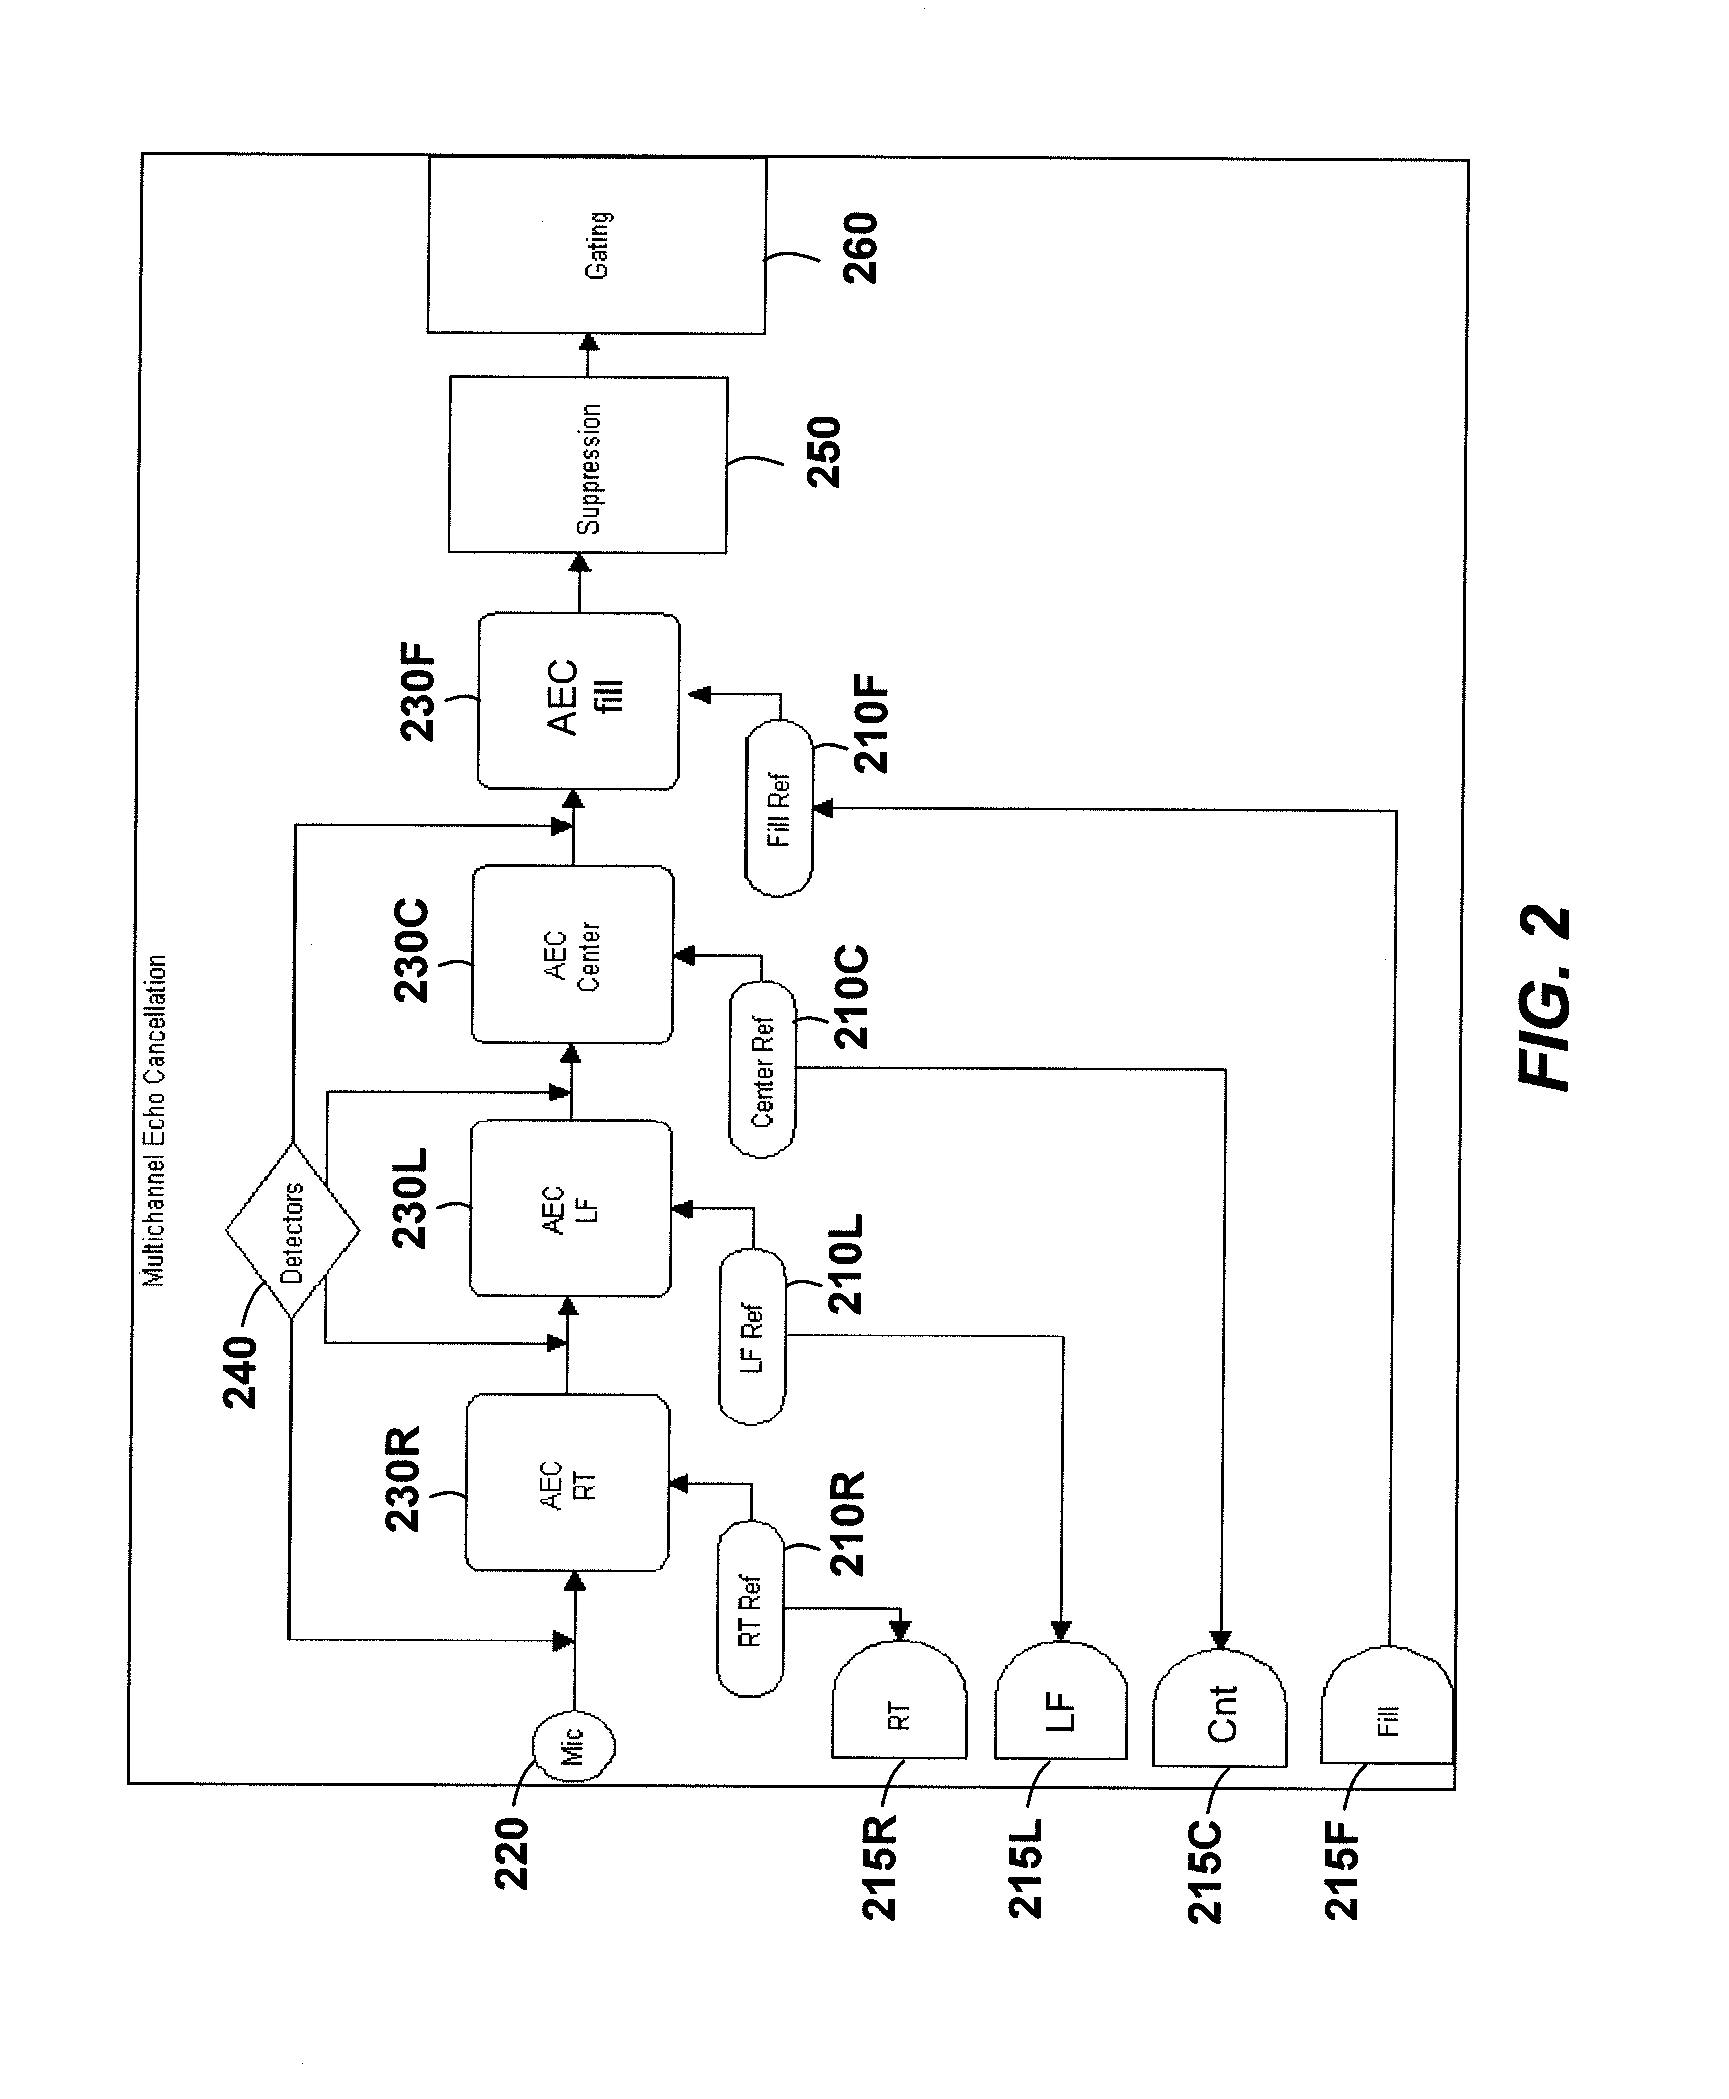 Methods and apparatuses for multi-channel acoustic echo cancelation